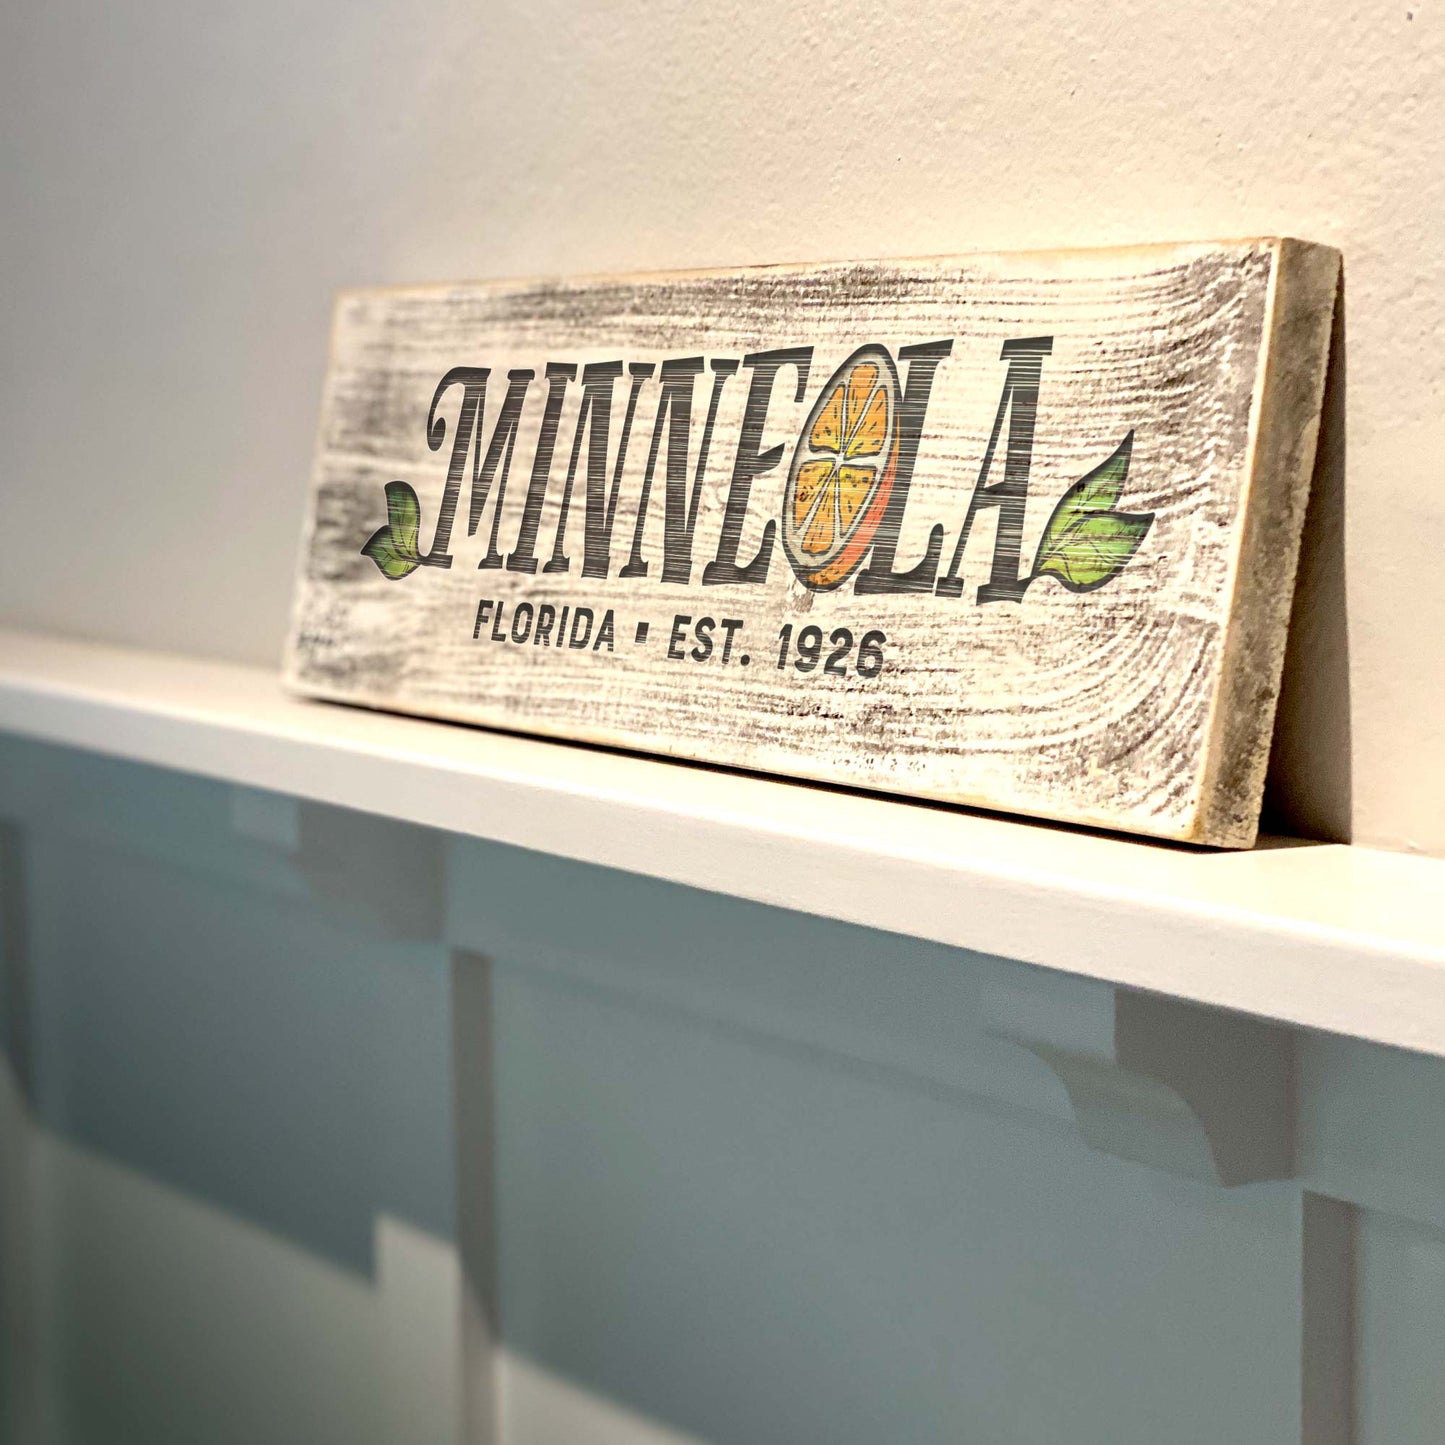 Minneola FL - Handcrafted Artisan Wood Sign